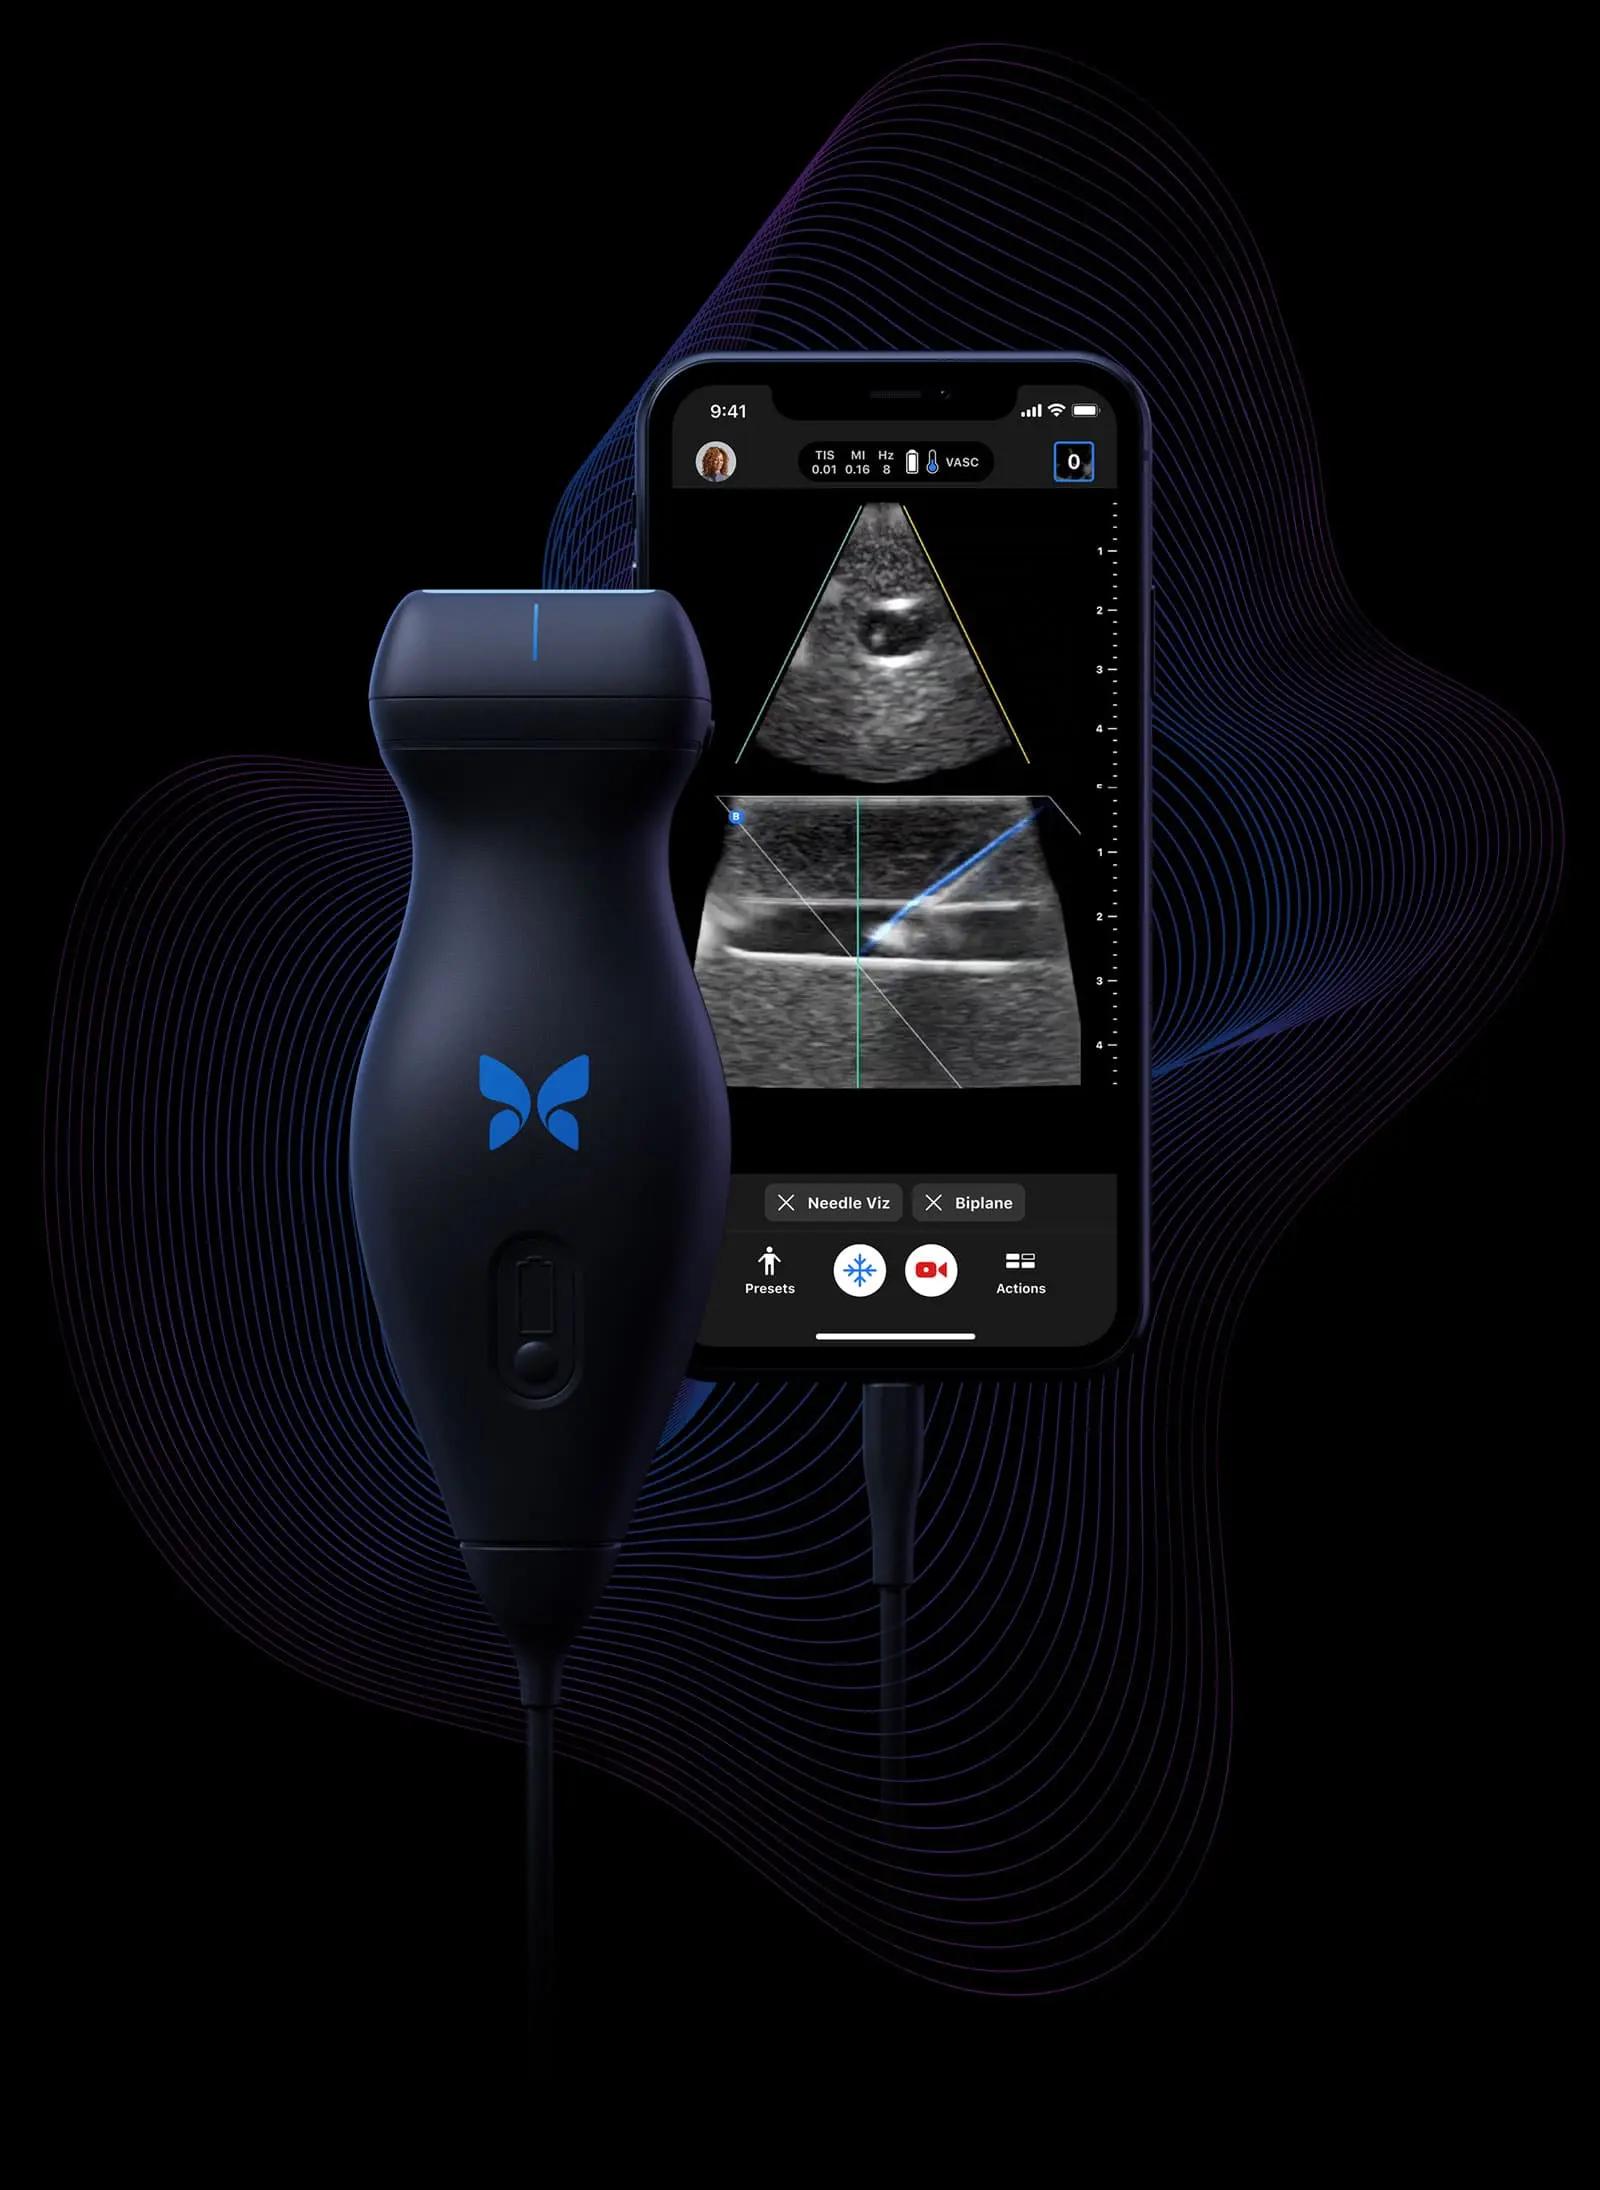 Is Handheld Ultrasound the 'New Stethoscope'?